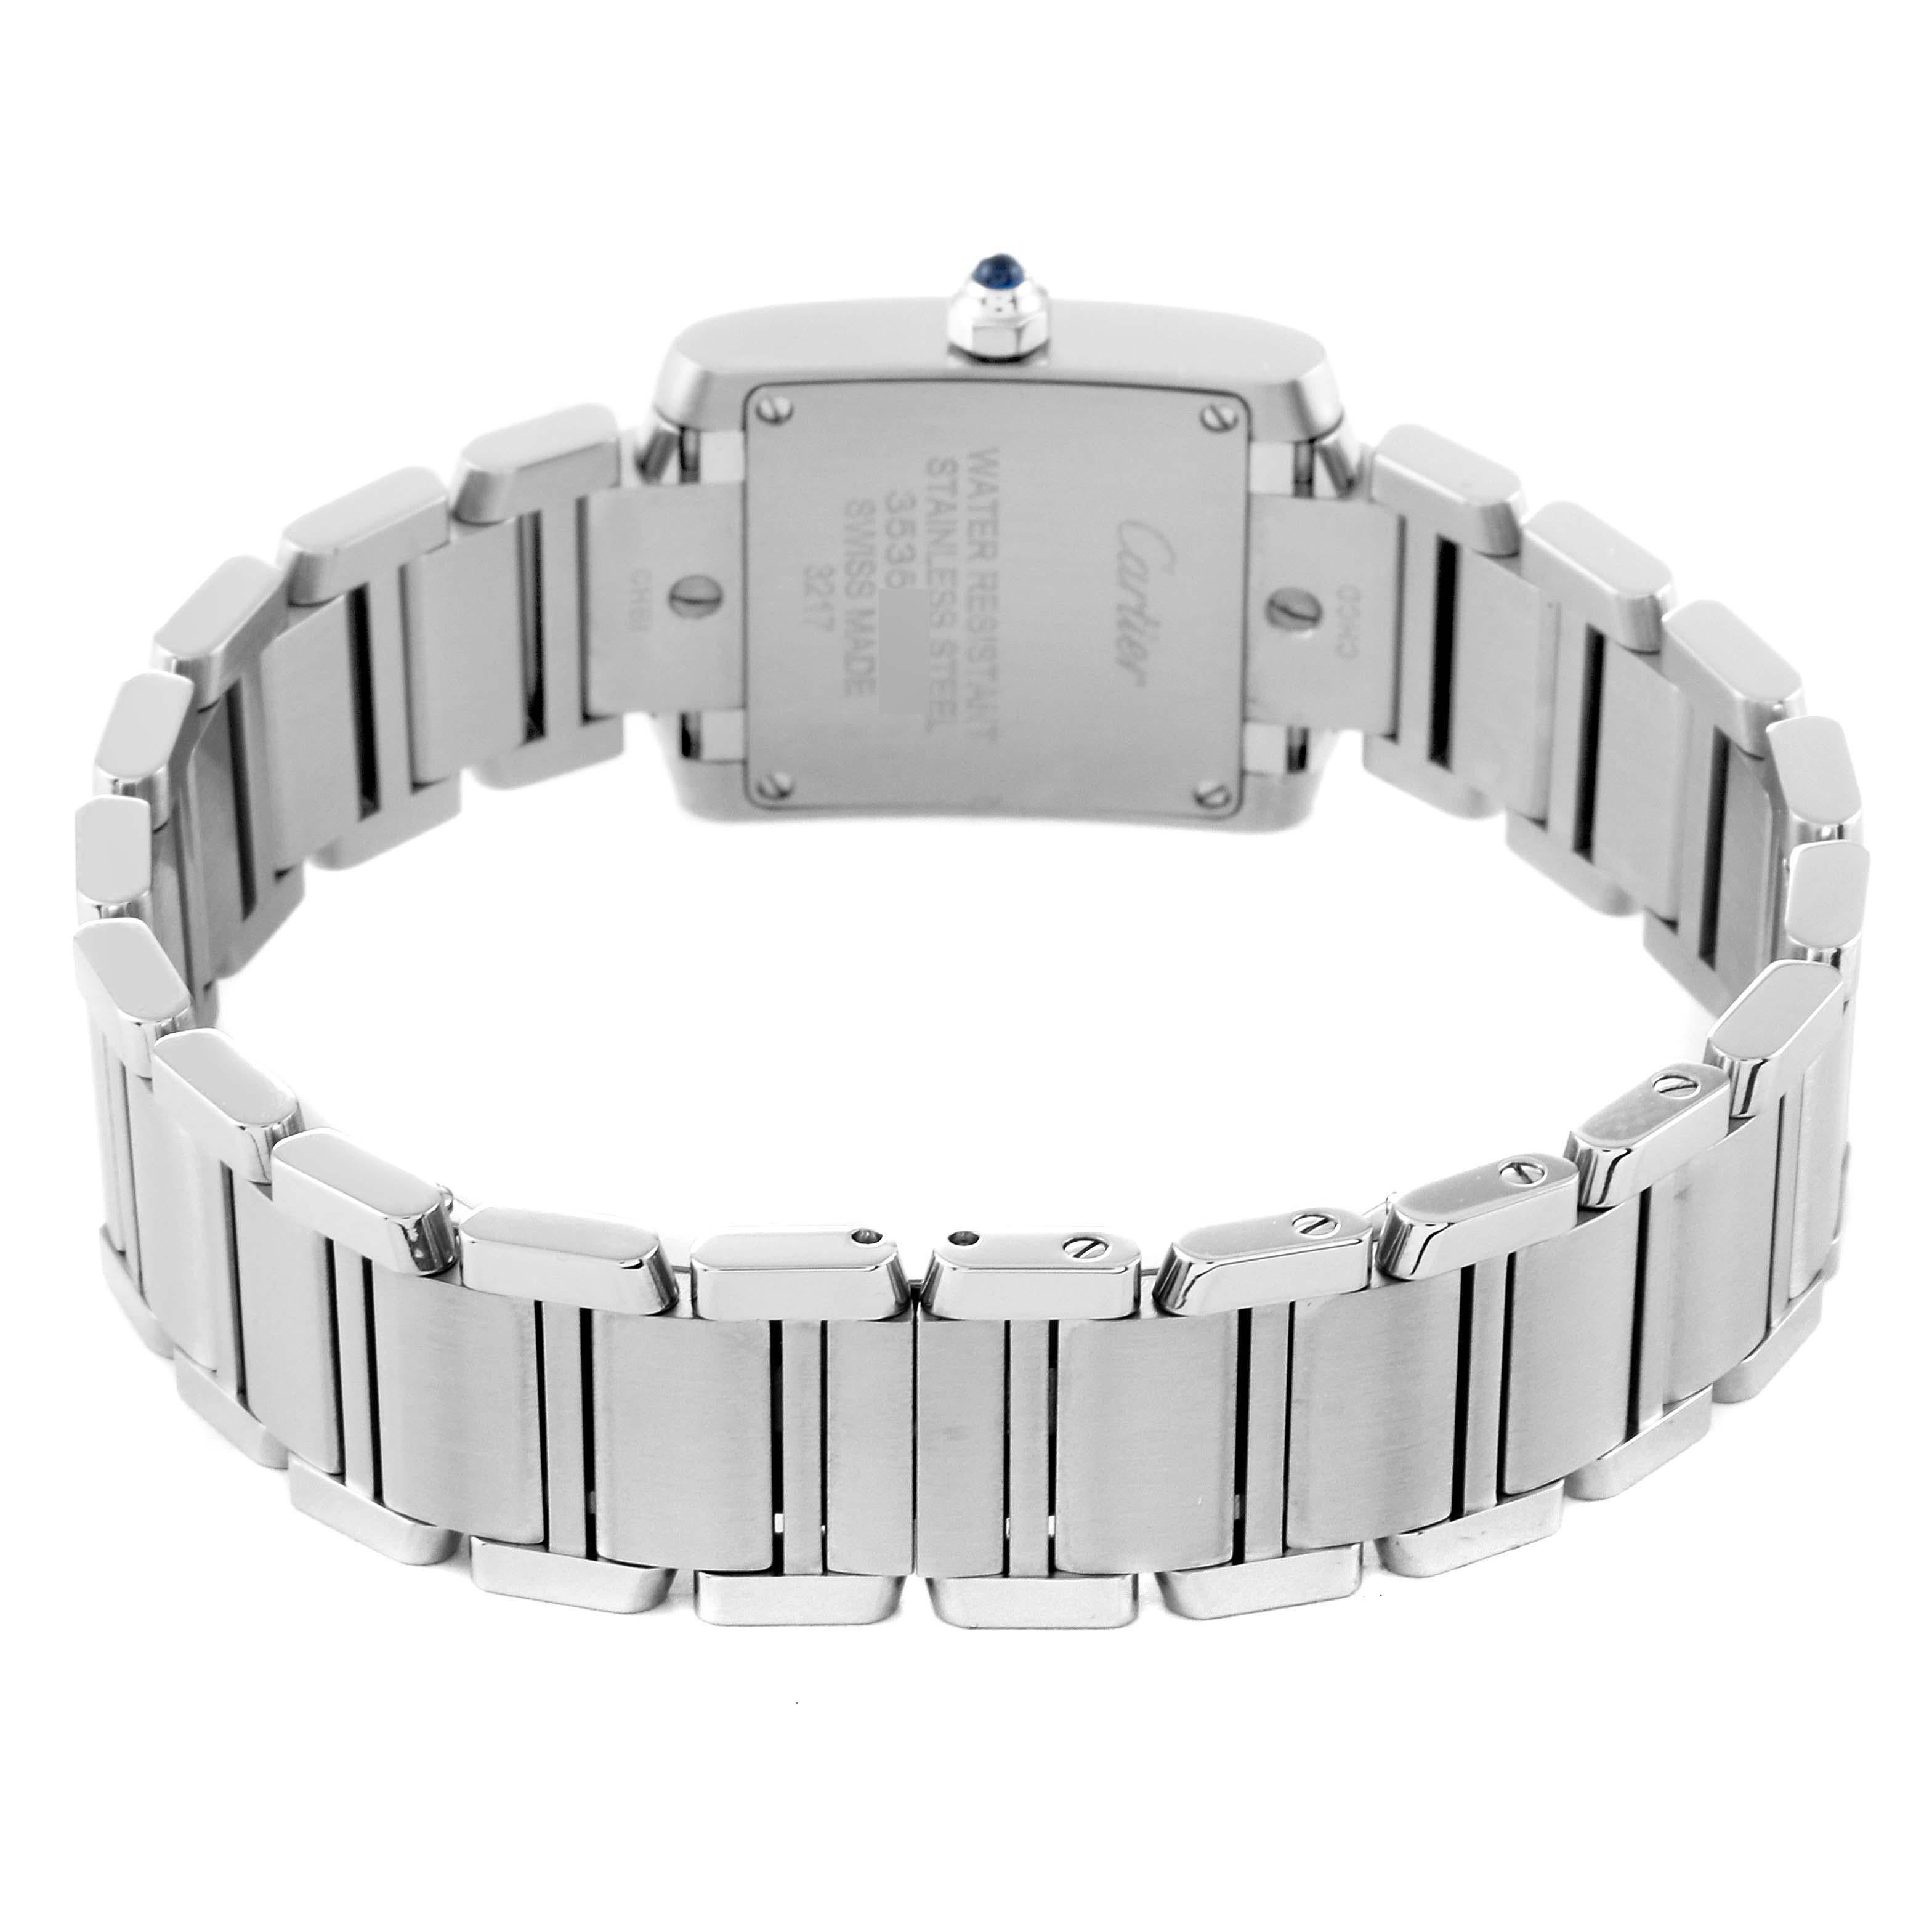 Cartier Tank Francaise Small Silver Dial Steel Ladies Watch W51008Q3 3